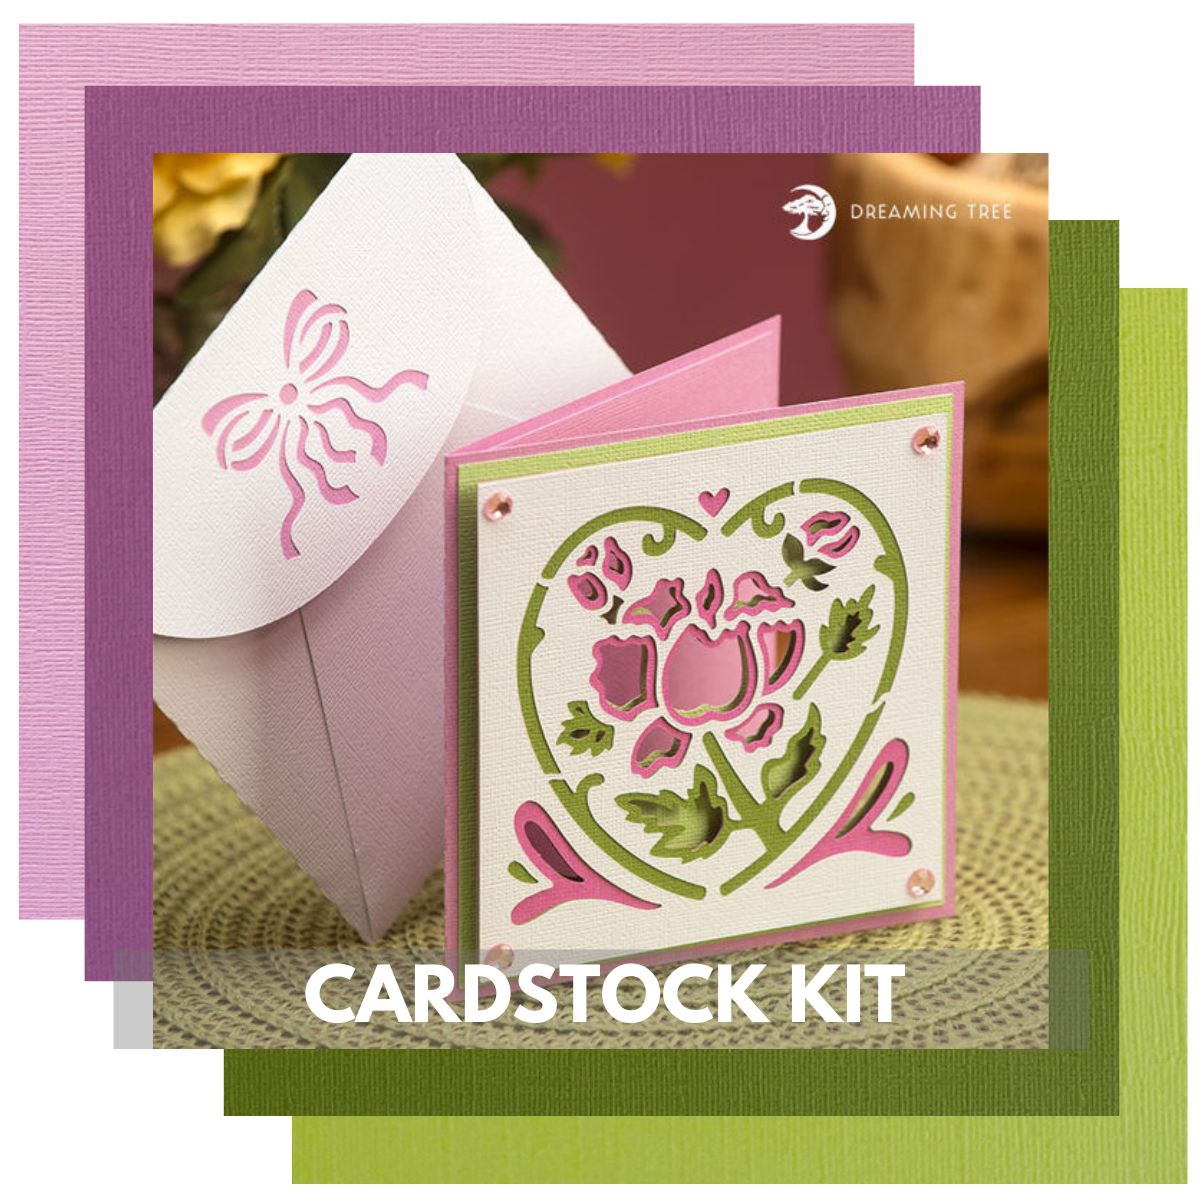 cardstock card kit for dreaming tree pink floral card